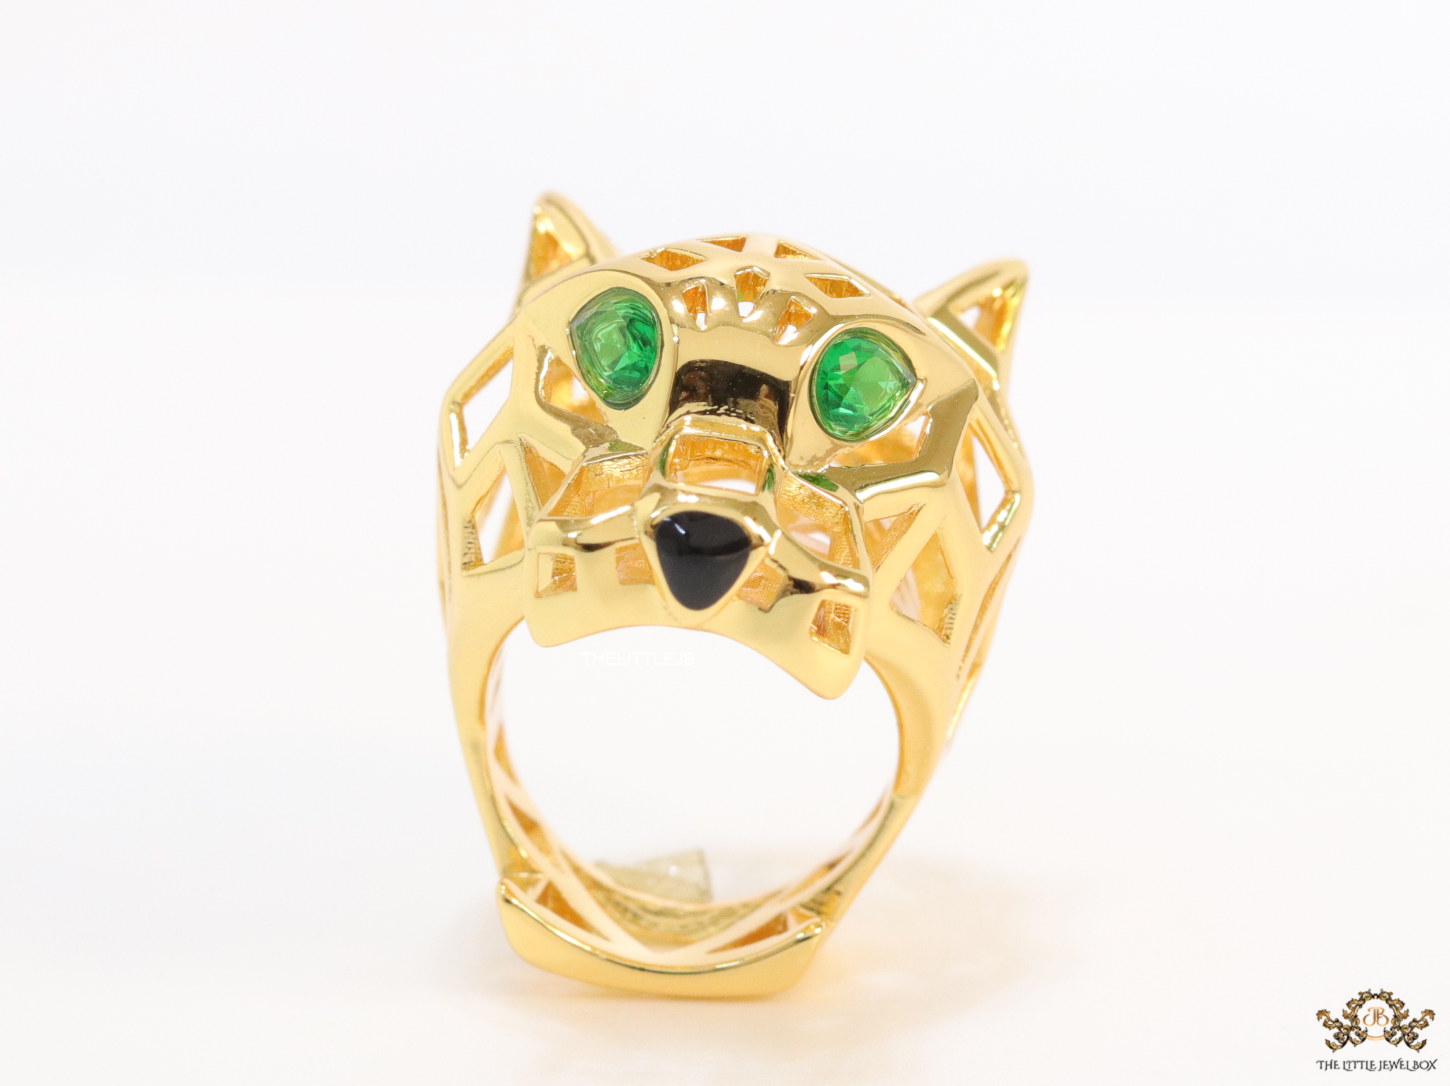 The Cartier Panther, what does it symbolize? - 58 Facettes